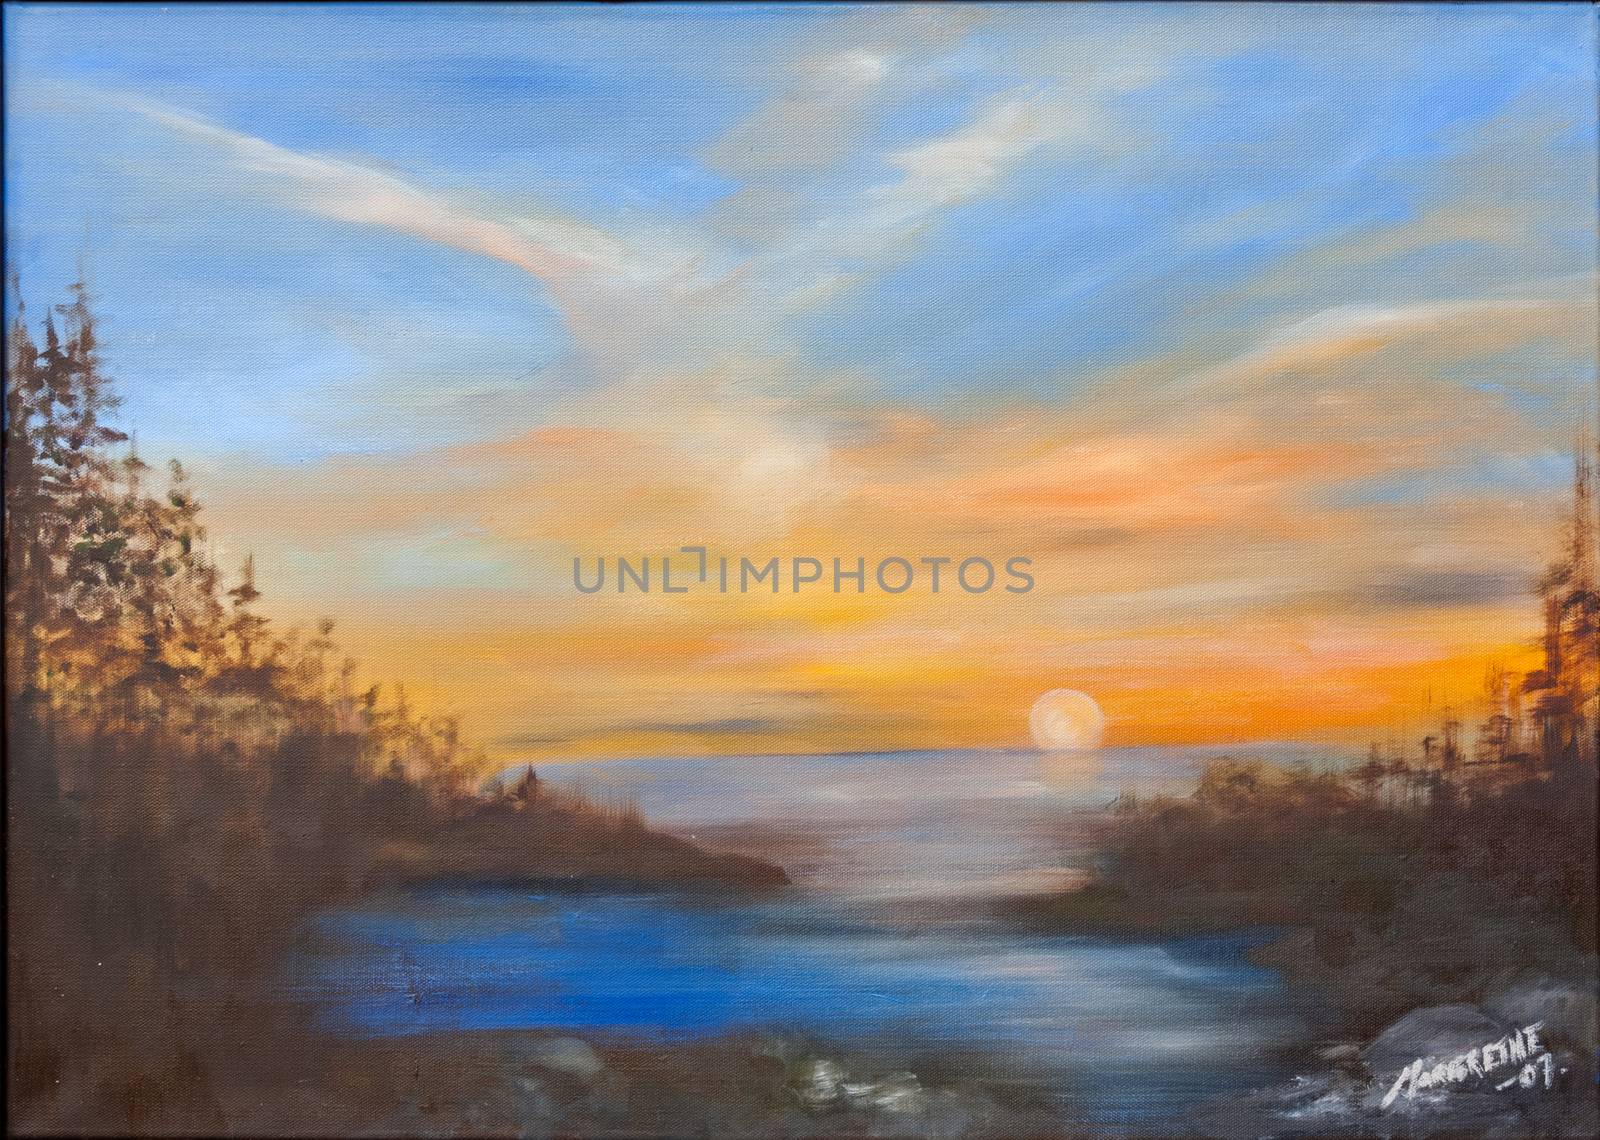 Sunset over the sea in western Norway in the late summer. Oil painting on canvas. Sea, forest, and mountains. Figurative art.